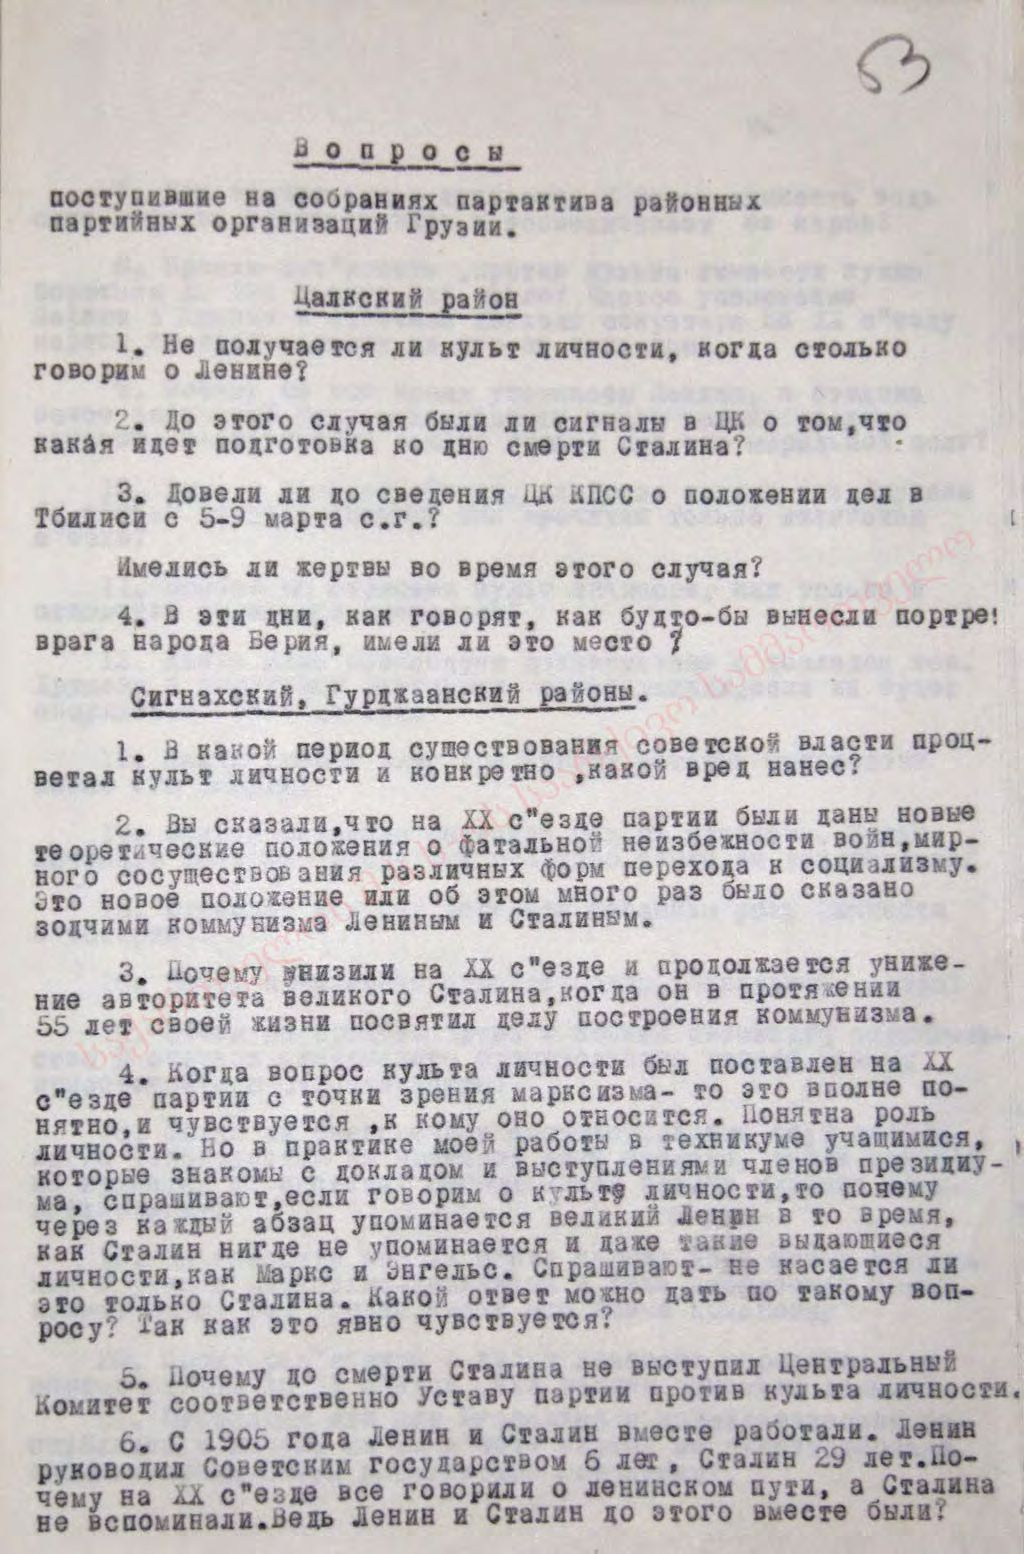 In the document the First Secretary of the Central Committee of Georgia Vasil Pavlovich Mzhavanadze informs the Presidium of the Central Committee of the USSR about the events developing in Georgia in March 1956.